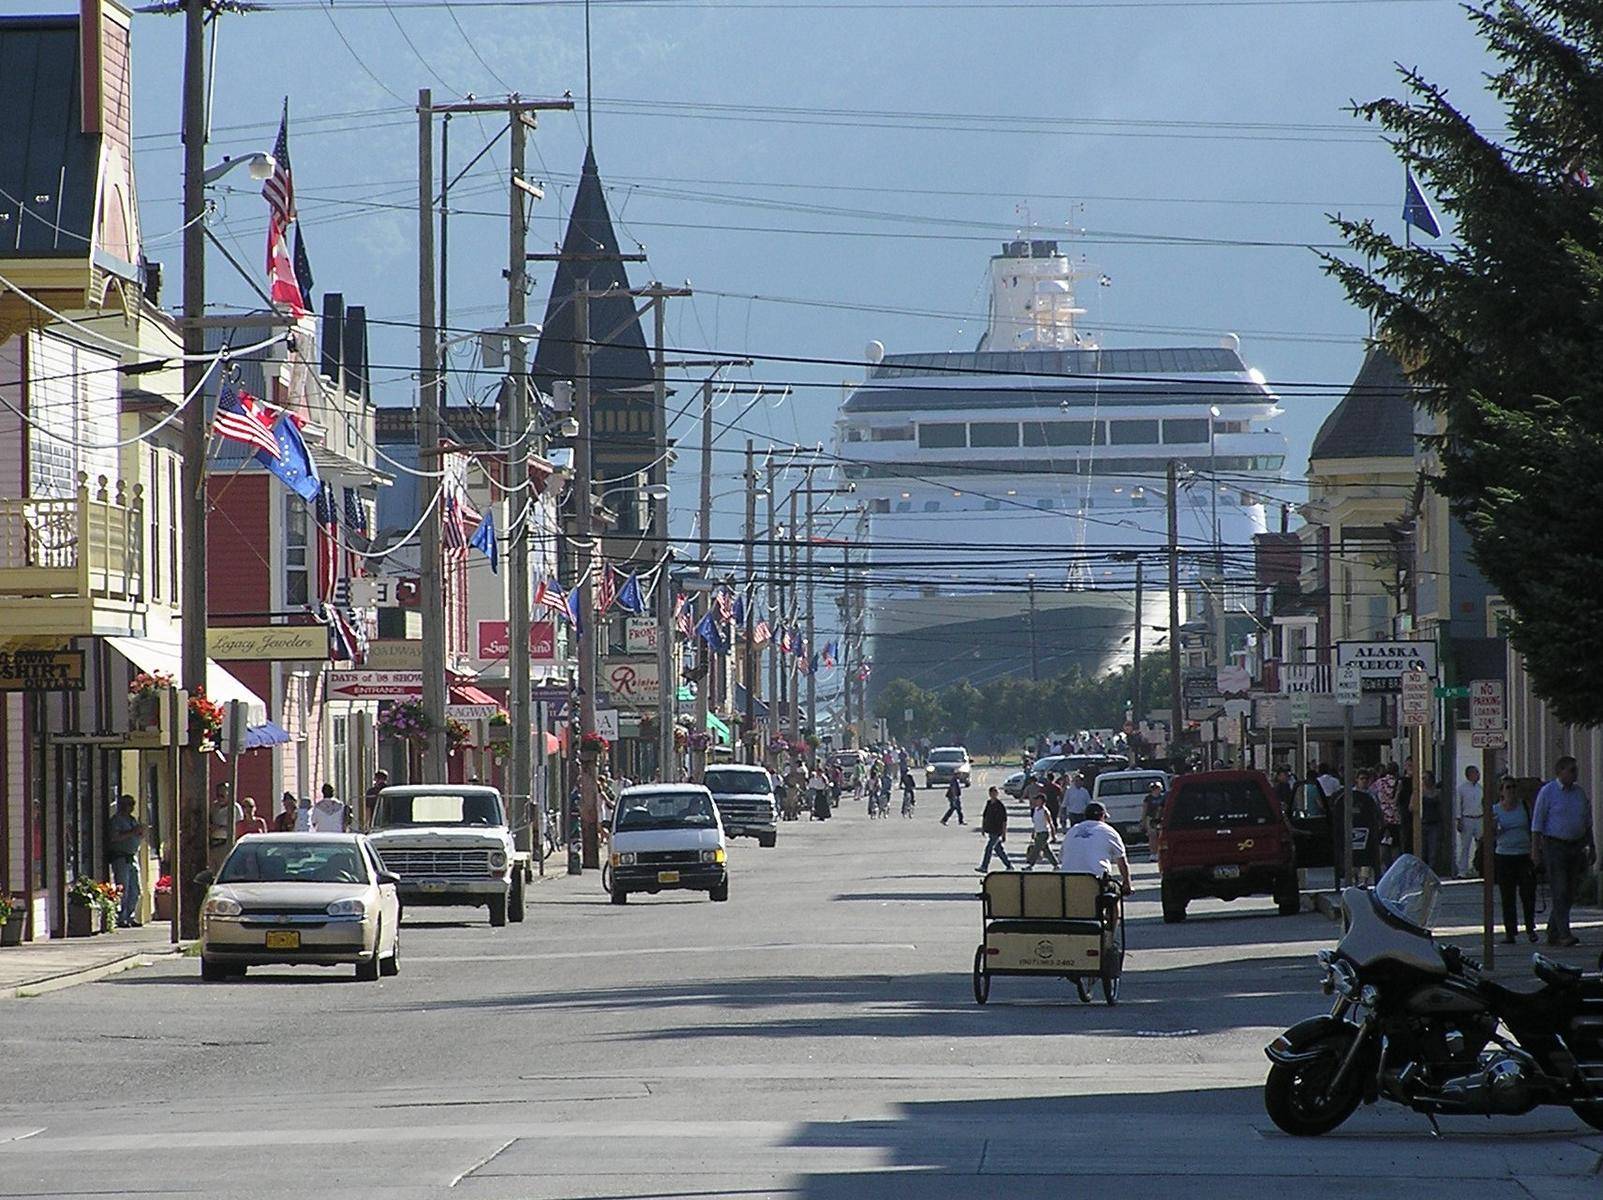 View along the main road in skagway towards the harbour with western style houses and a huge ship in the background